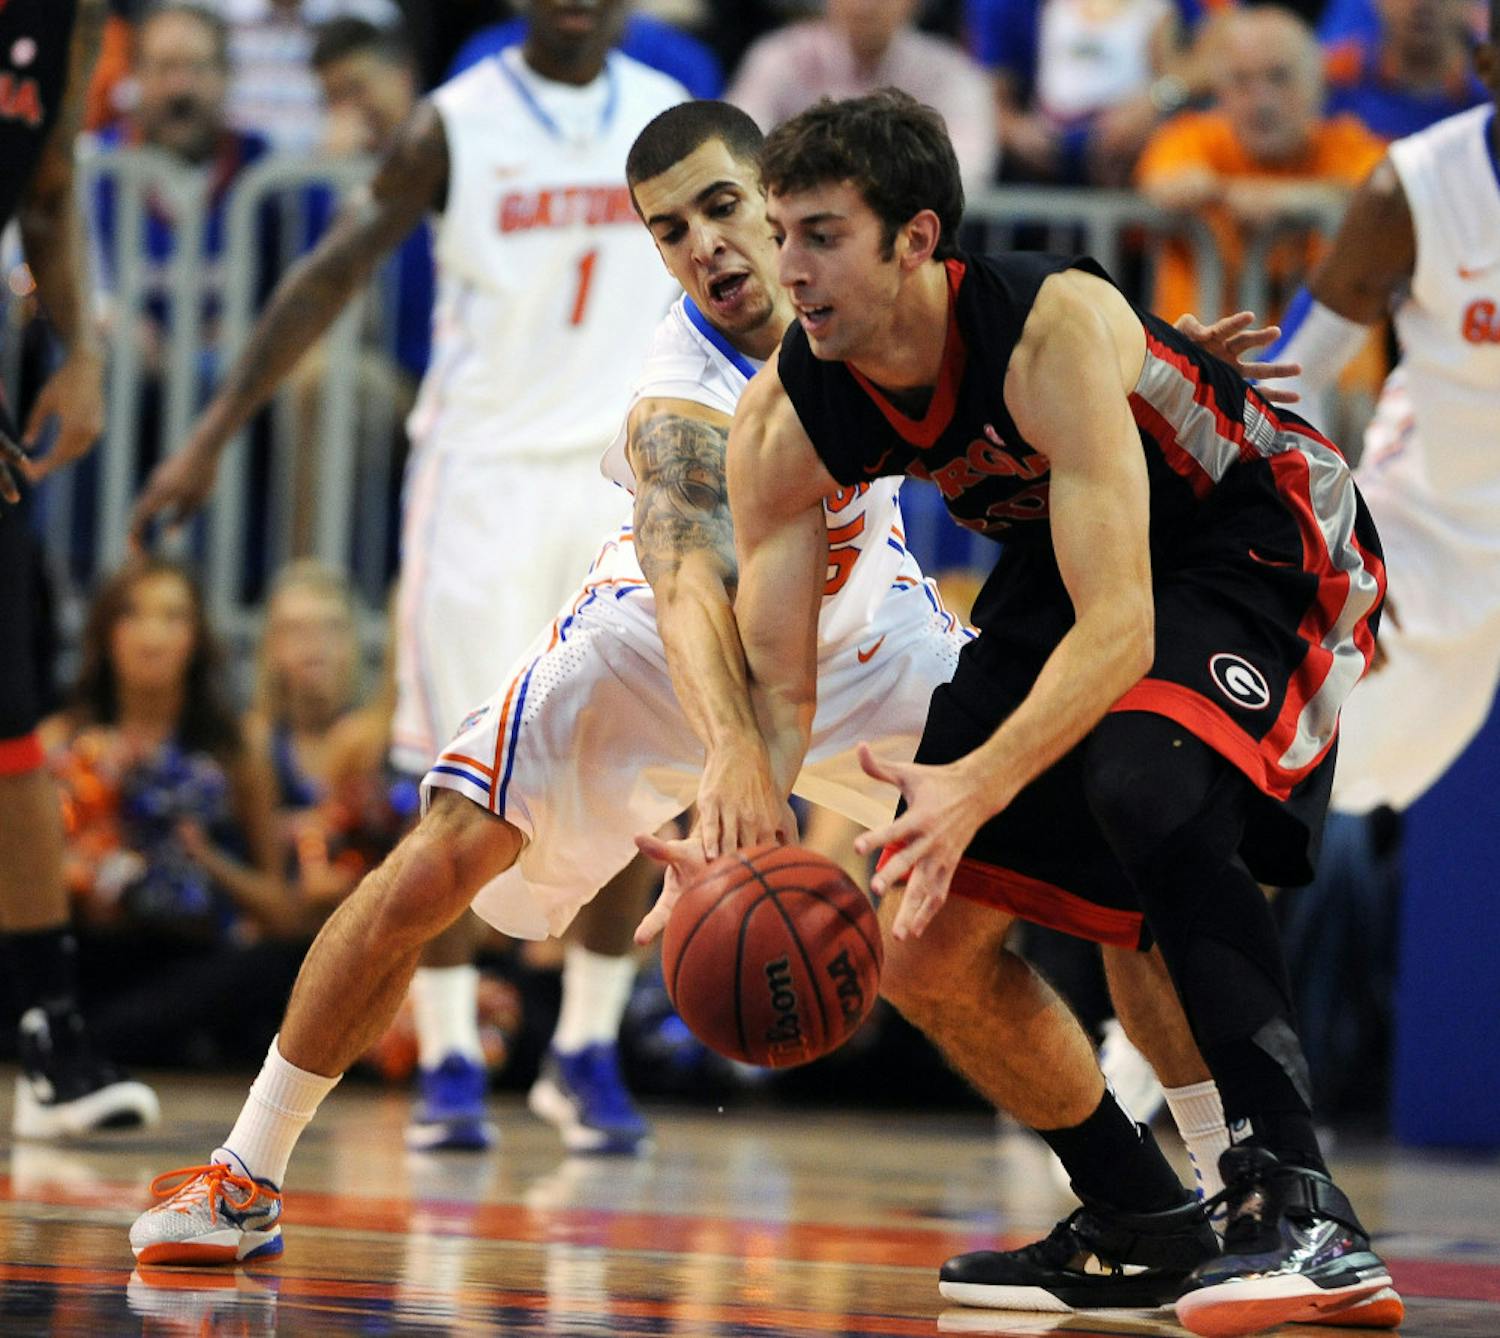 Florida's Scottie Wilbekin (5) tries to break the ball lose from
Georgia's Connor Nolte (20) during the first half of an NCAA
college basketball game in Gainesville, Fla., Tuesday, Jan. 10,
2012.